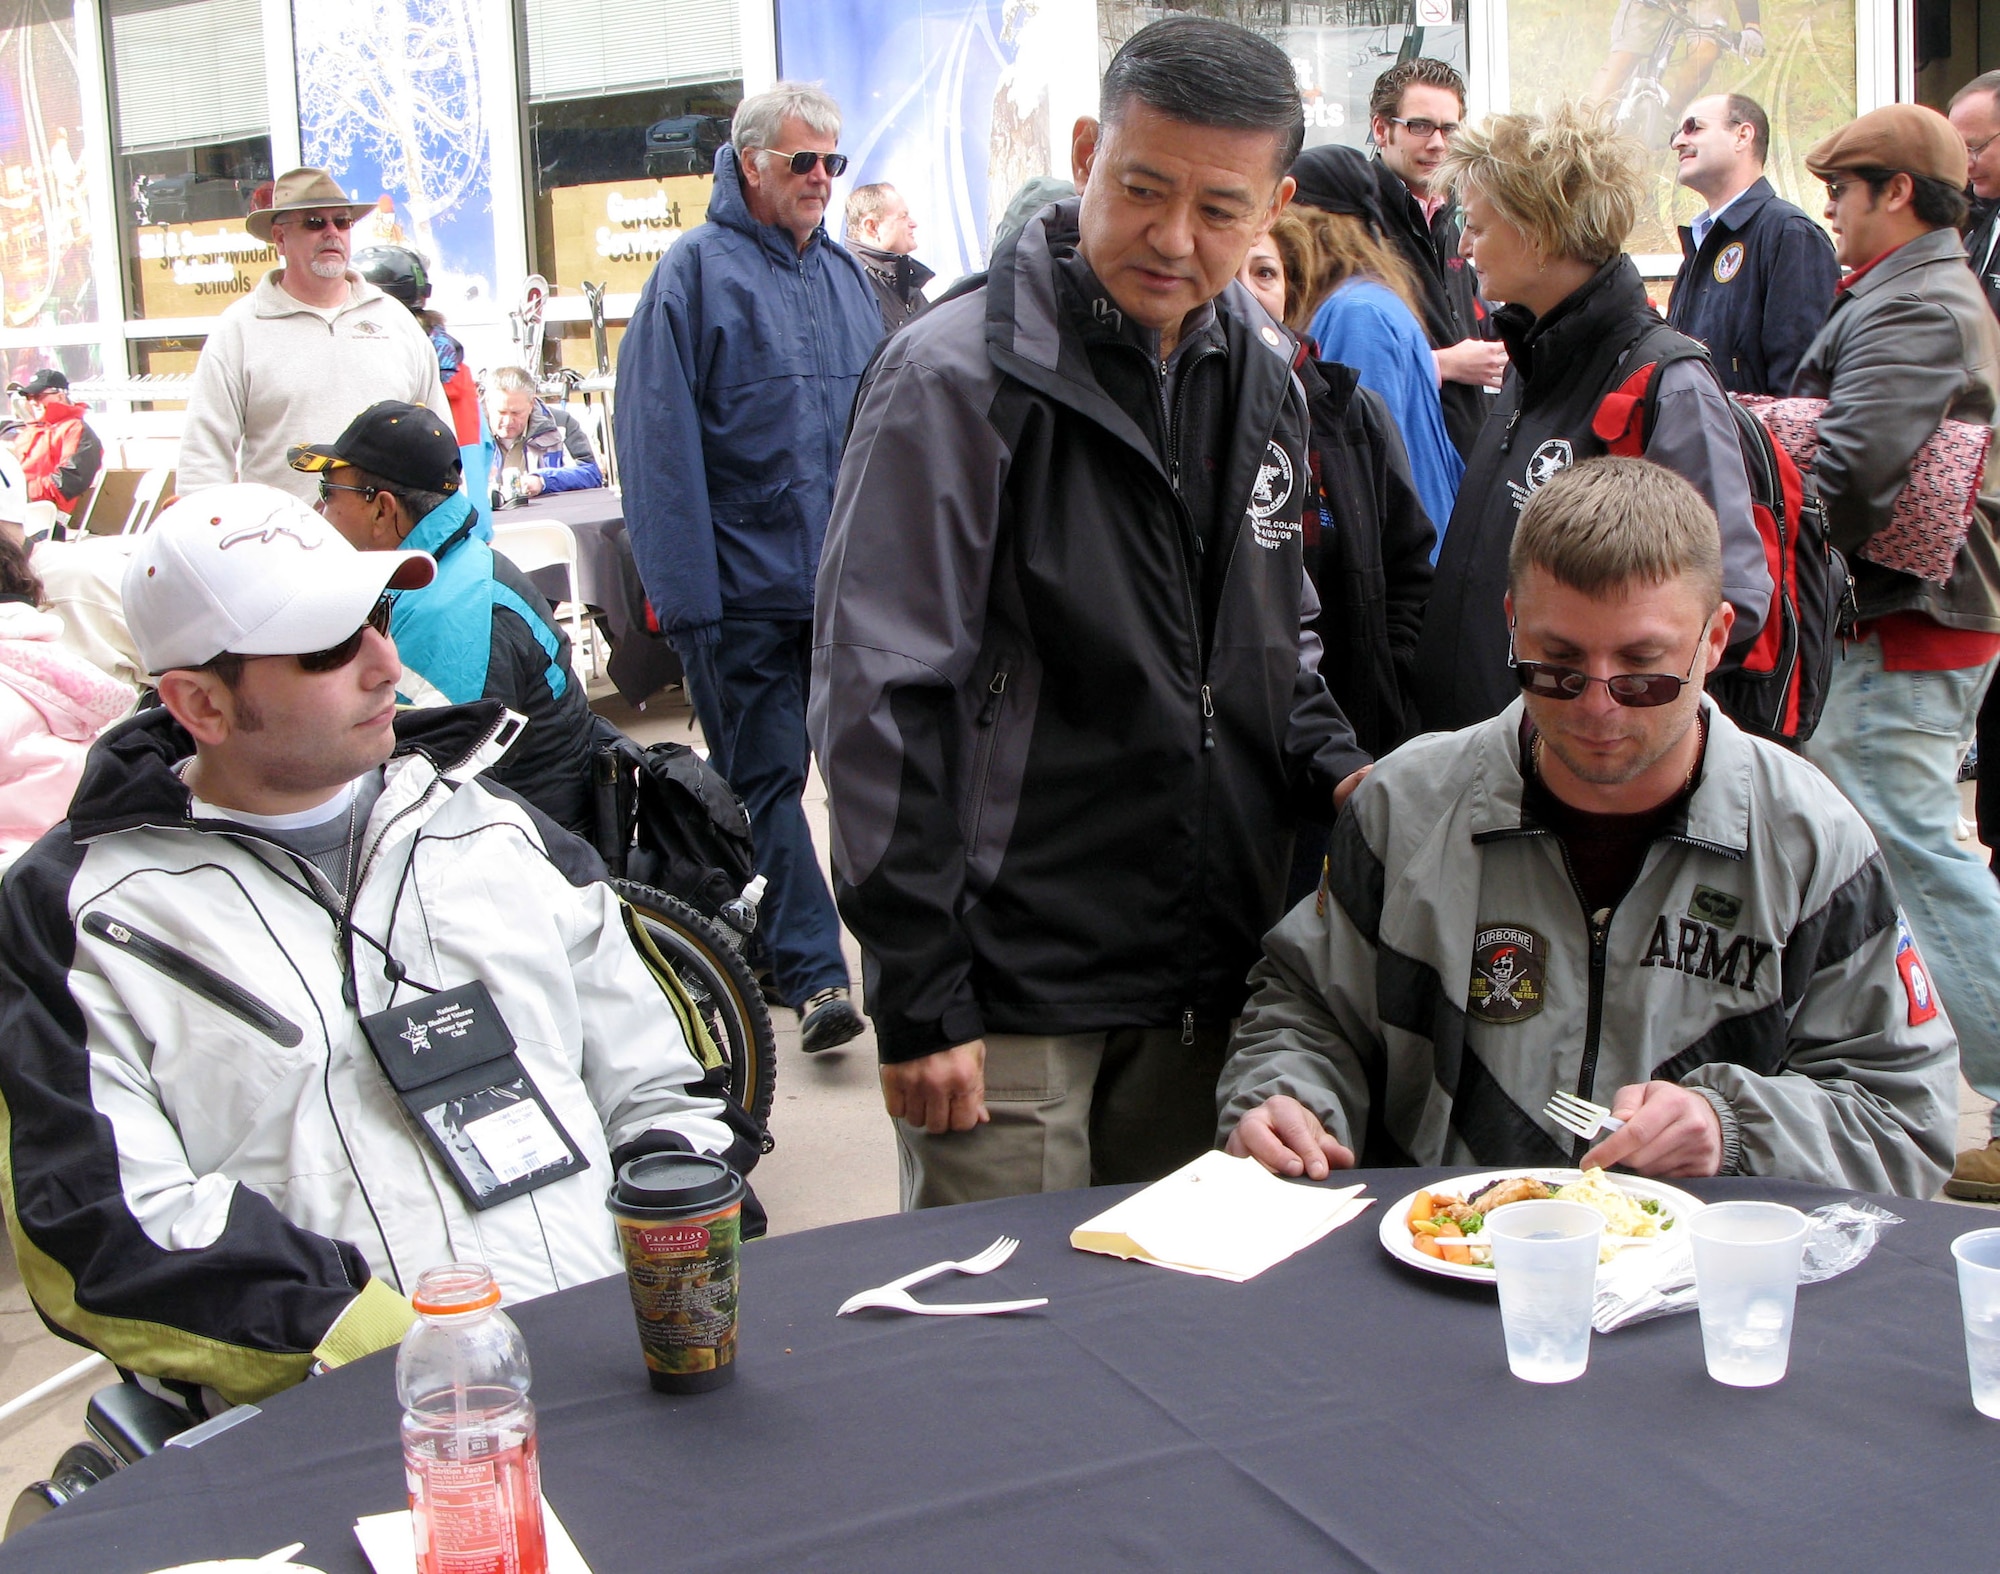 Veterans Affairs Secretary Eric K. Shinseki (center) chats with participants in the 23rd annual National Disabled Veterans Winter Sports Clinic at Snowmass Village, Colo., during a March 29 "Taste of Aspen" celebration that kicked off the six-day event.  Among participating veterans are retired Army Cpl. Allen Babin (left), an 82nd Airborne Division soldier who suffered a traumatic brain injury during operations in Iraq in 2003, and Army Pfc. Chris Lynch (right), who suffered a traumatic brain injury during a 2000 training accident in France. (Defense Department photo/Donna Miles)